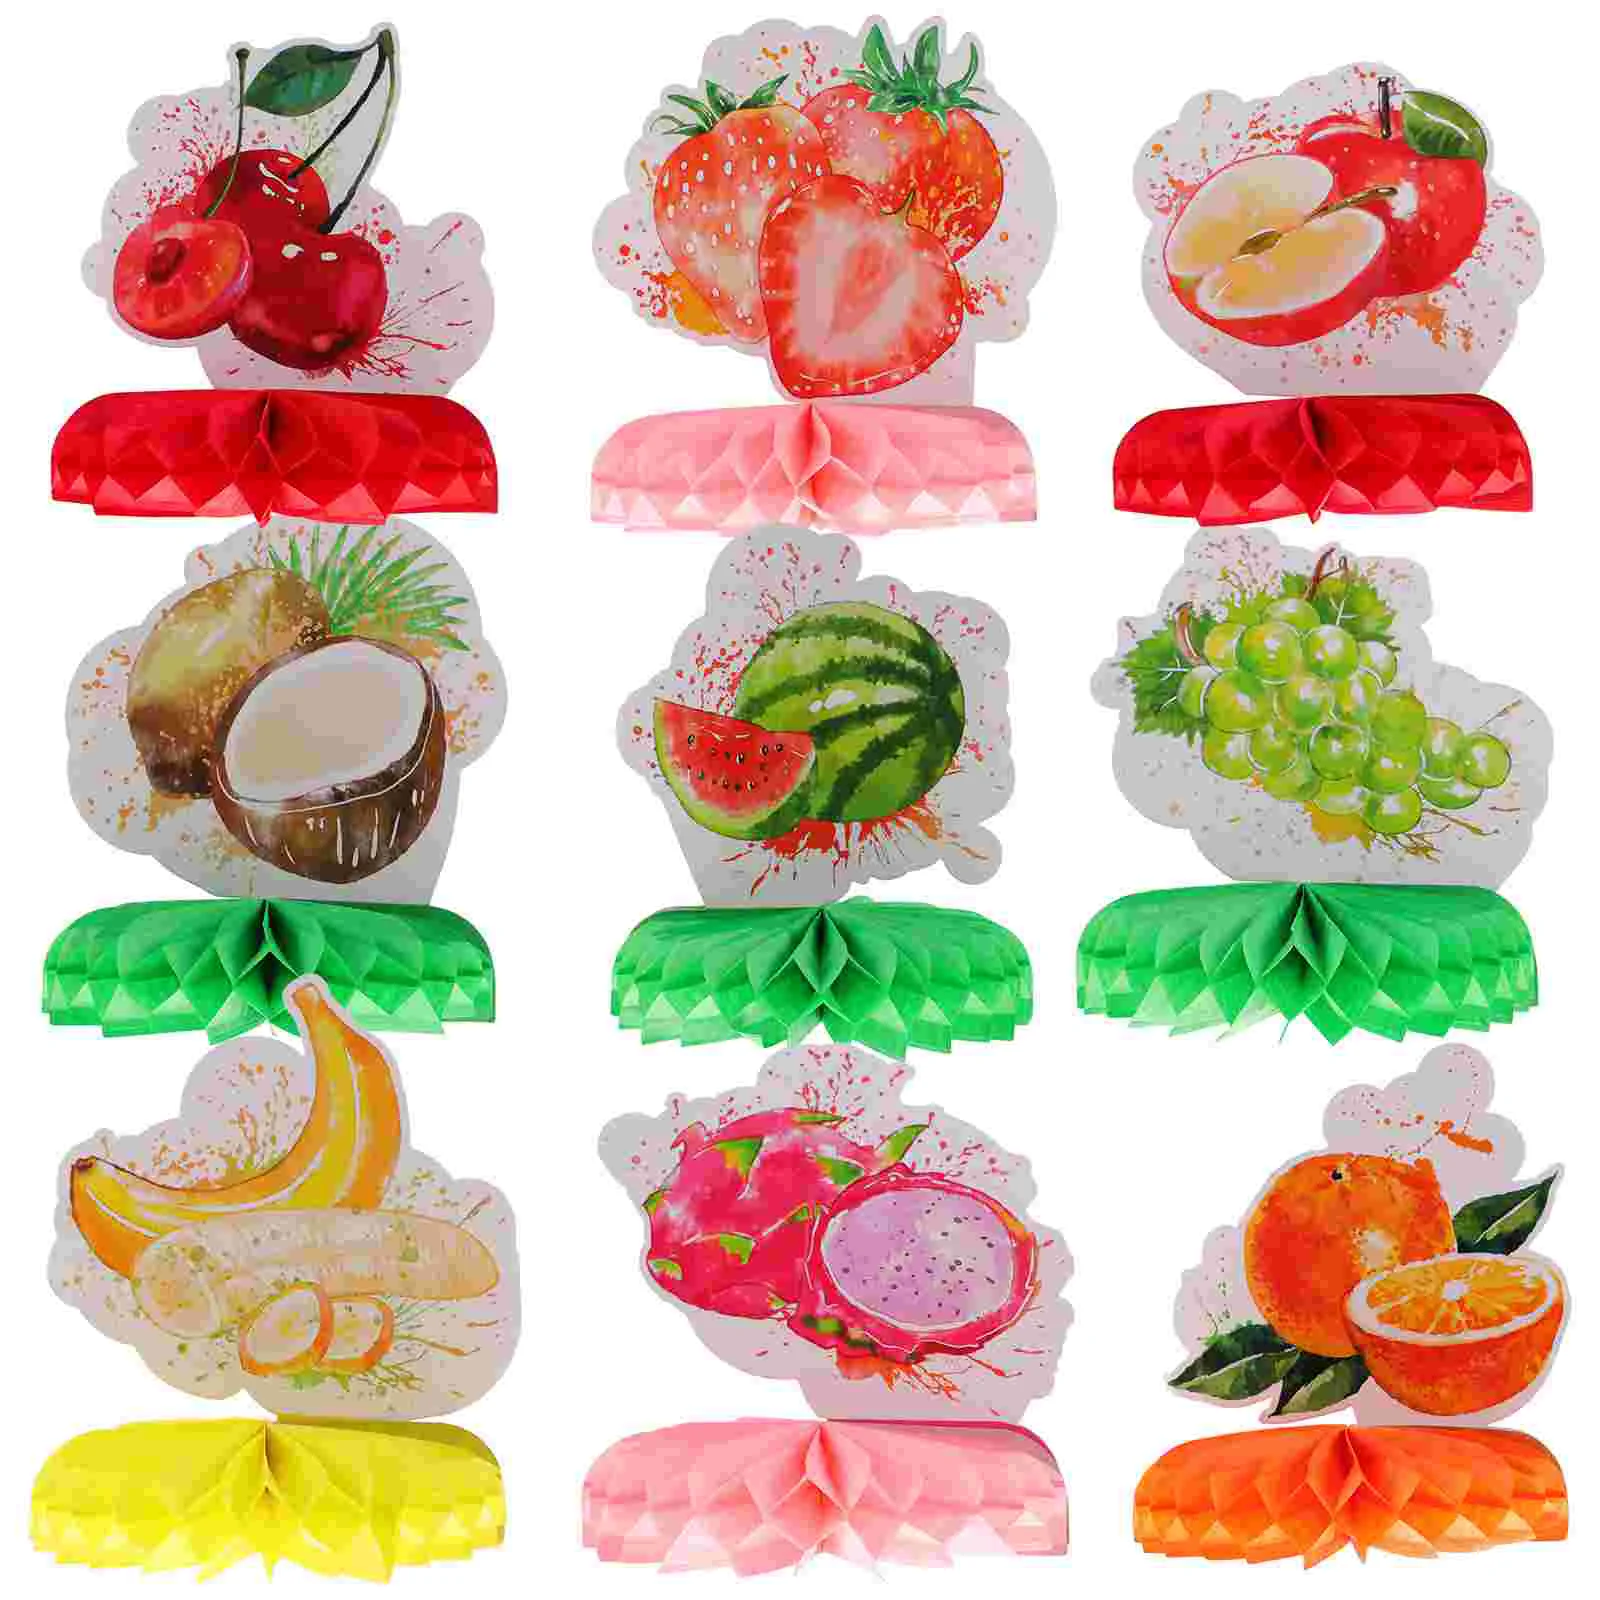 

Honeycomb Table Party Favors Fruit Centerpieces Decors Hawaii Decorations Paper Summer Themed Tables Ornament